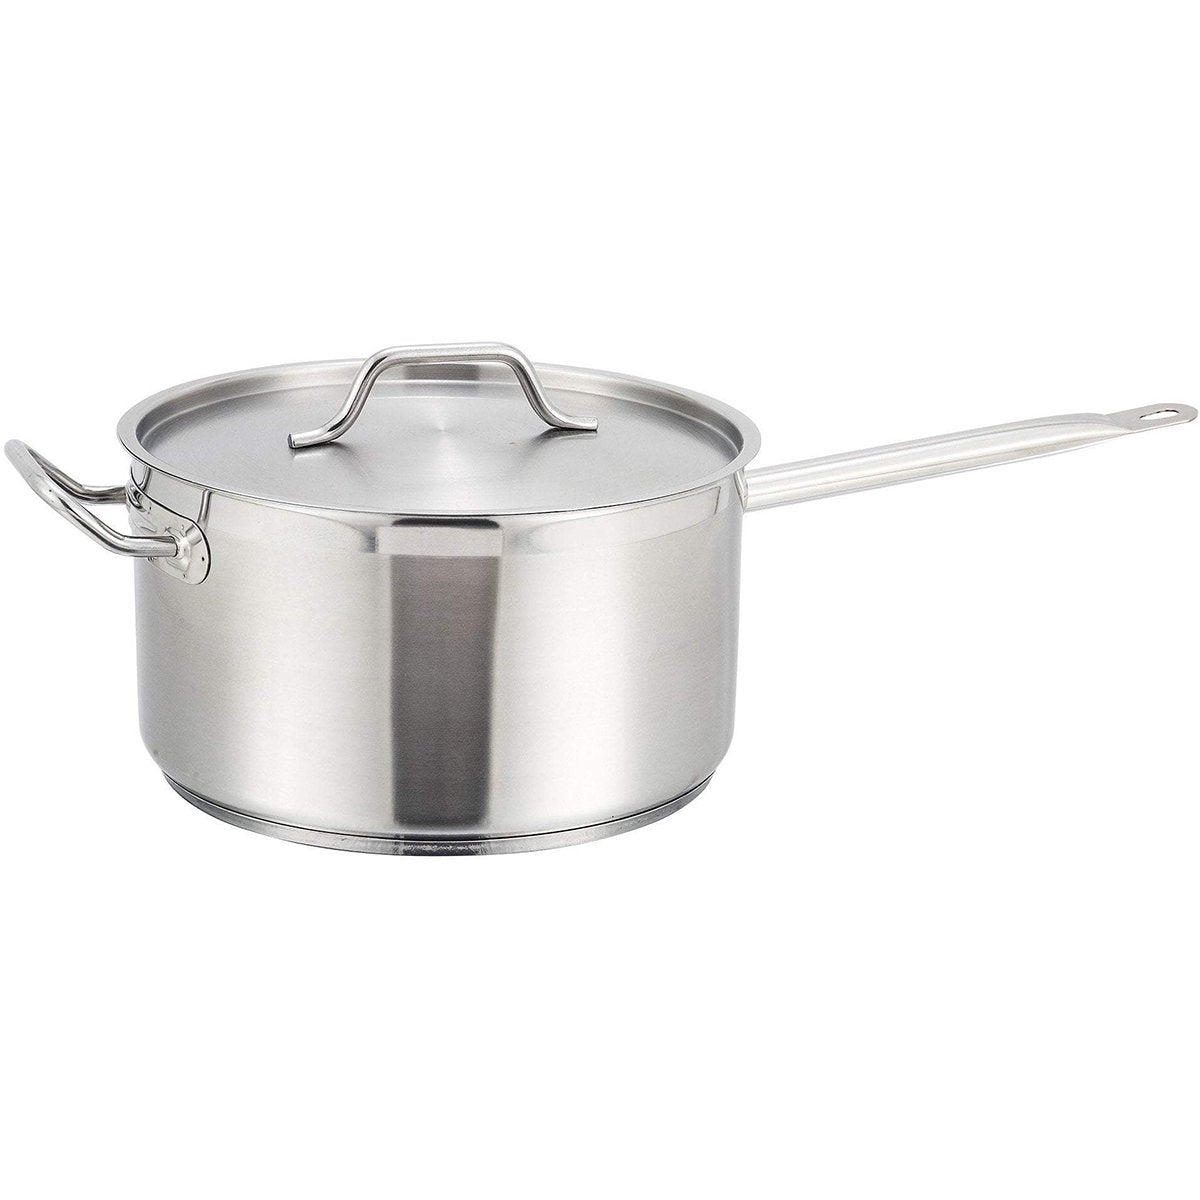 Professional Saucepan with Lid and Helper handle Stainless steel 6.3 litres Rental